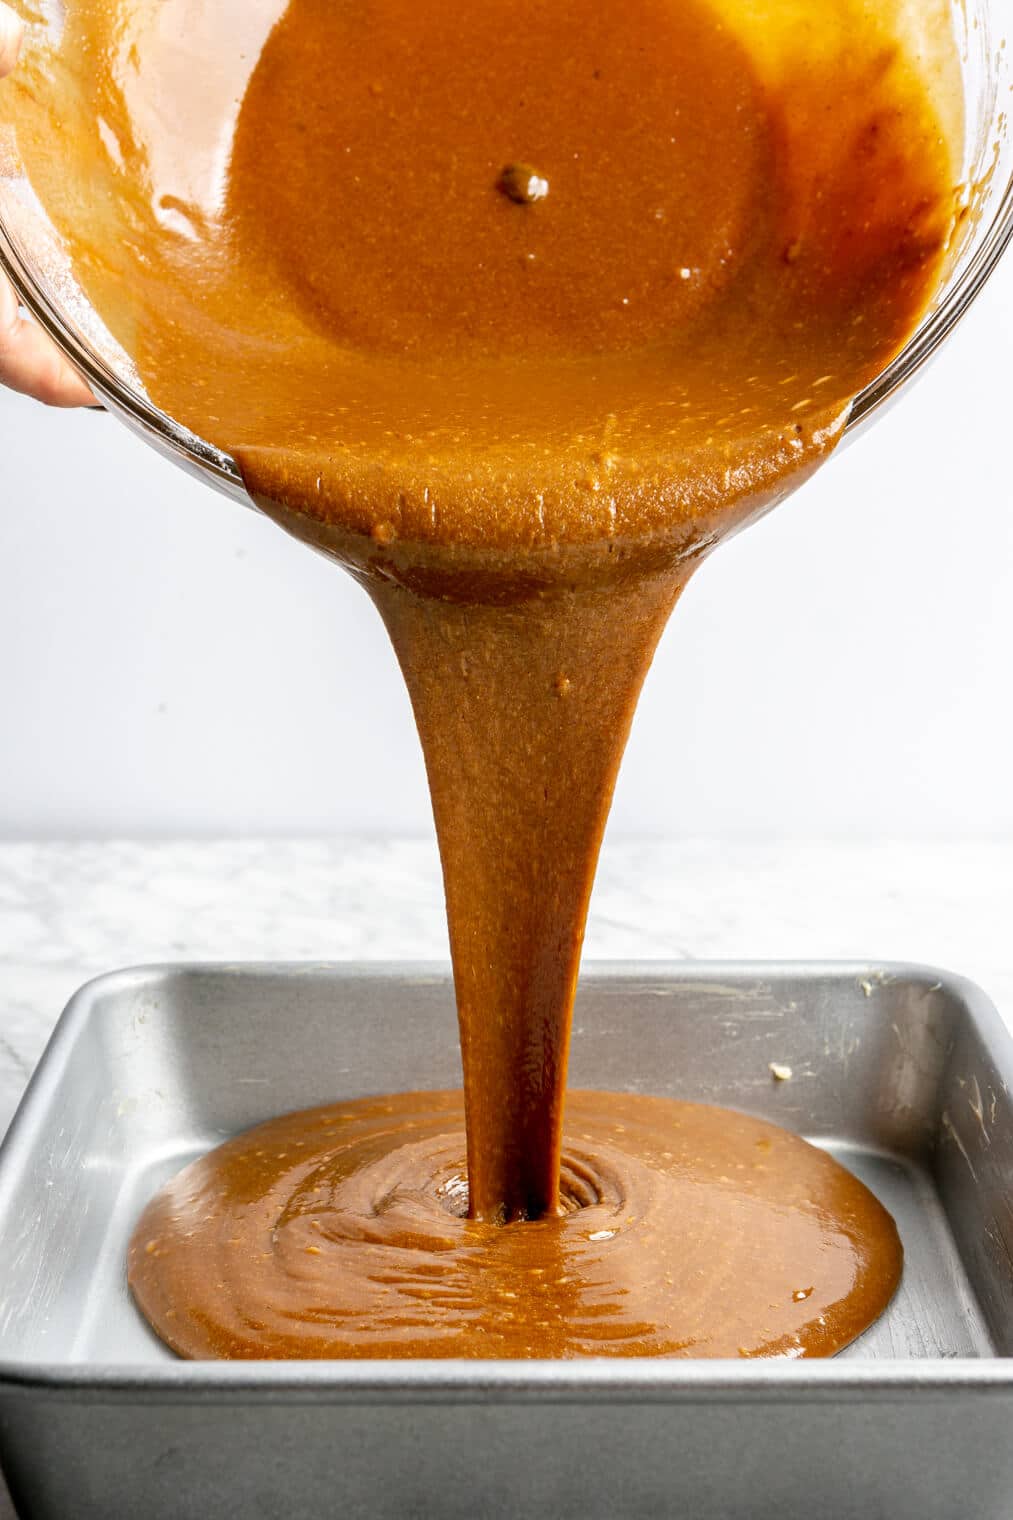 Classic gingerbread batter being poured into an 8x8 metal pan.